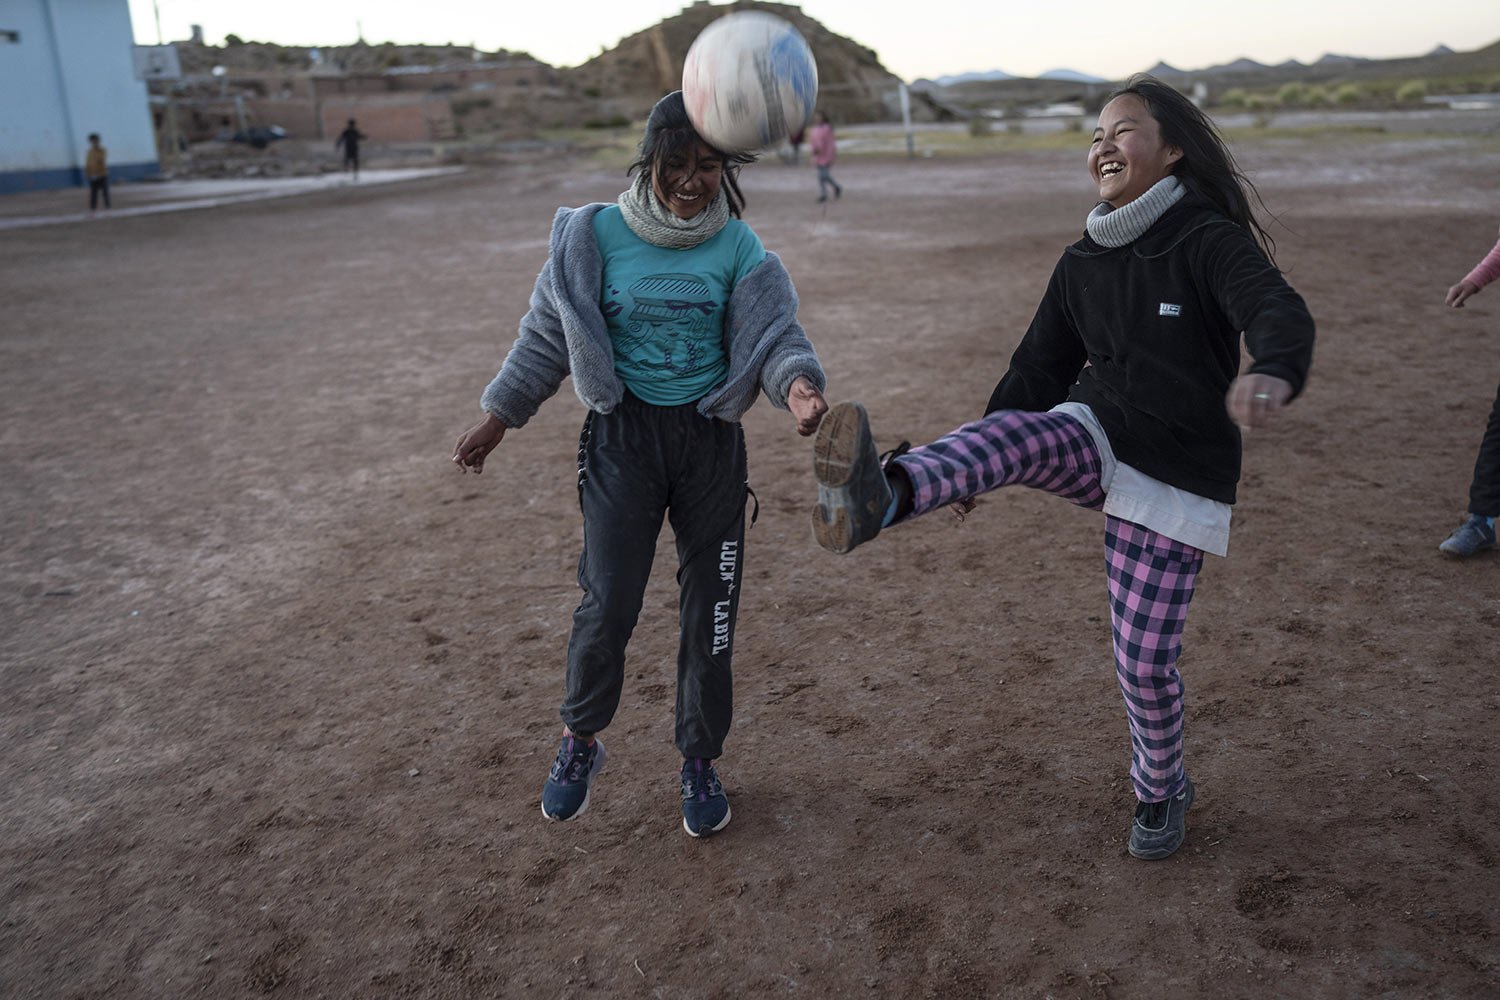  Students play soccer in Huancar, Jujuy Province, Argentina, April 25, 2023.  